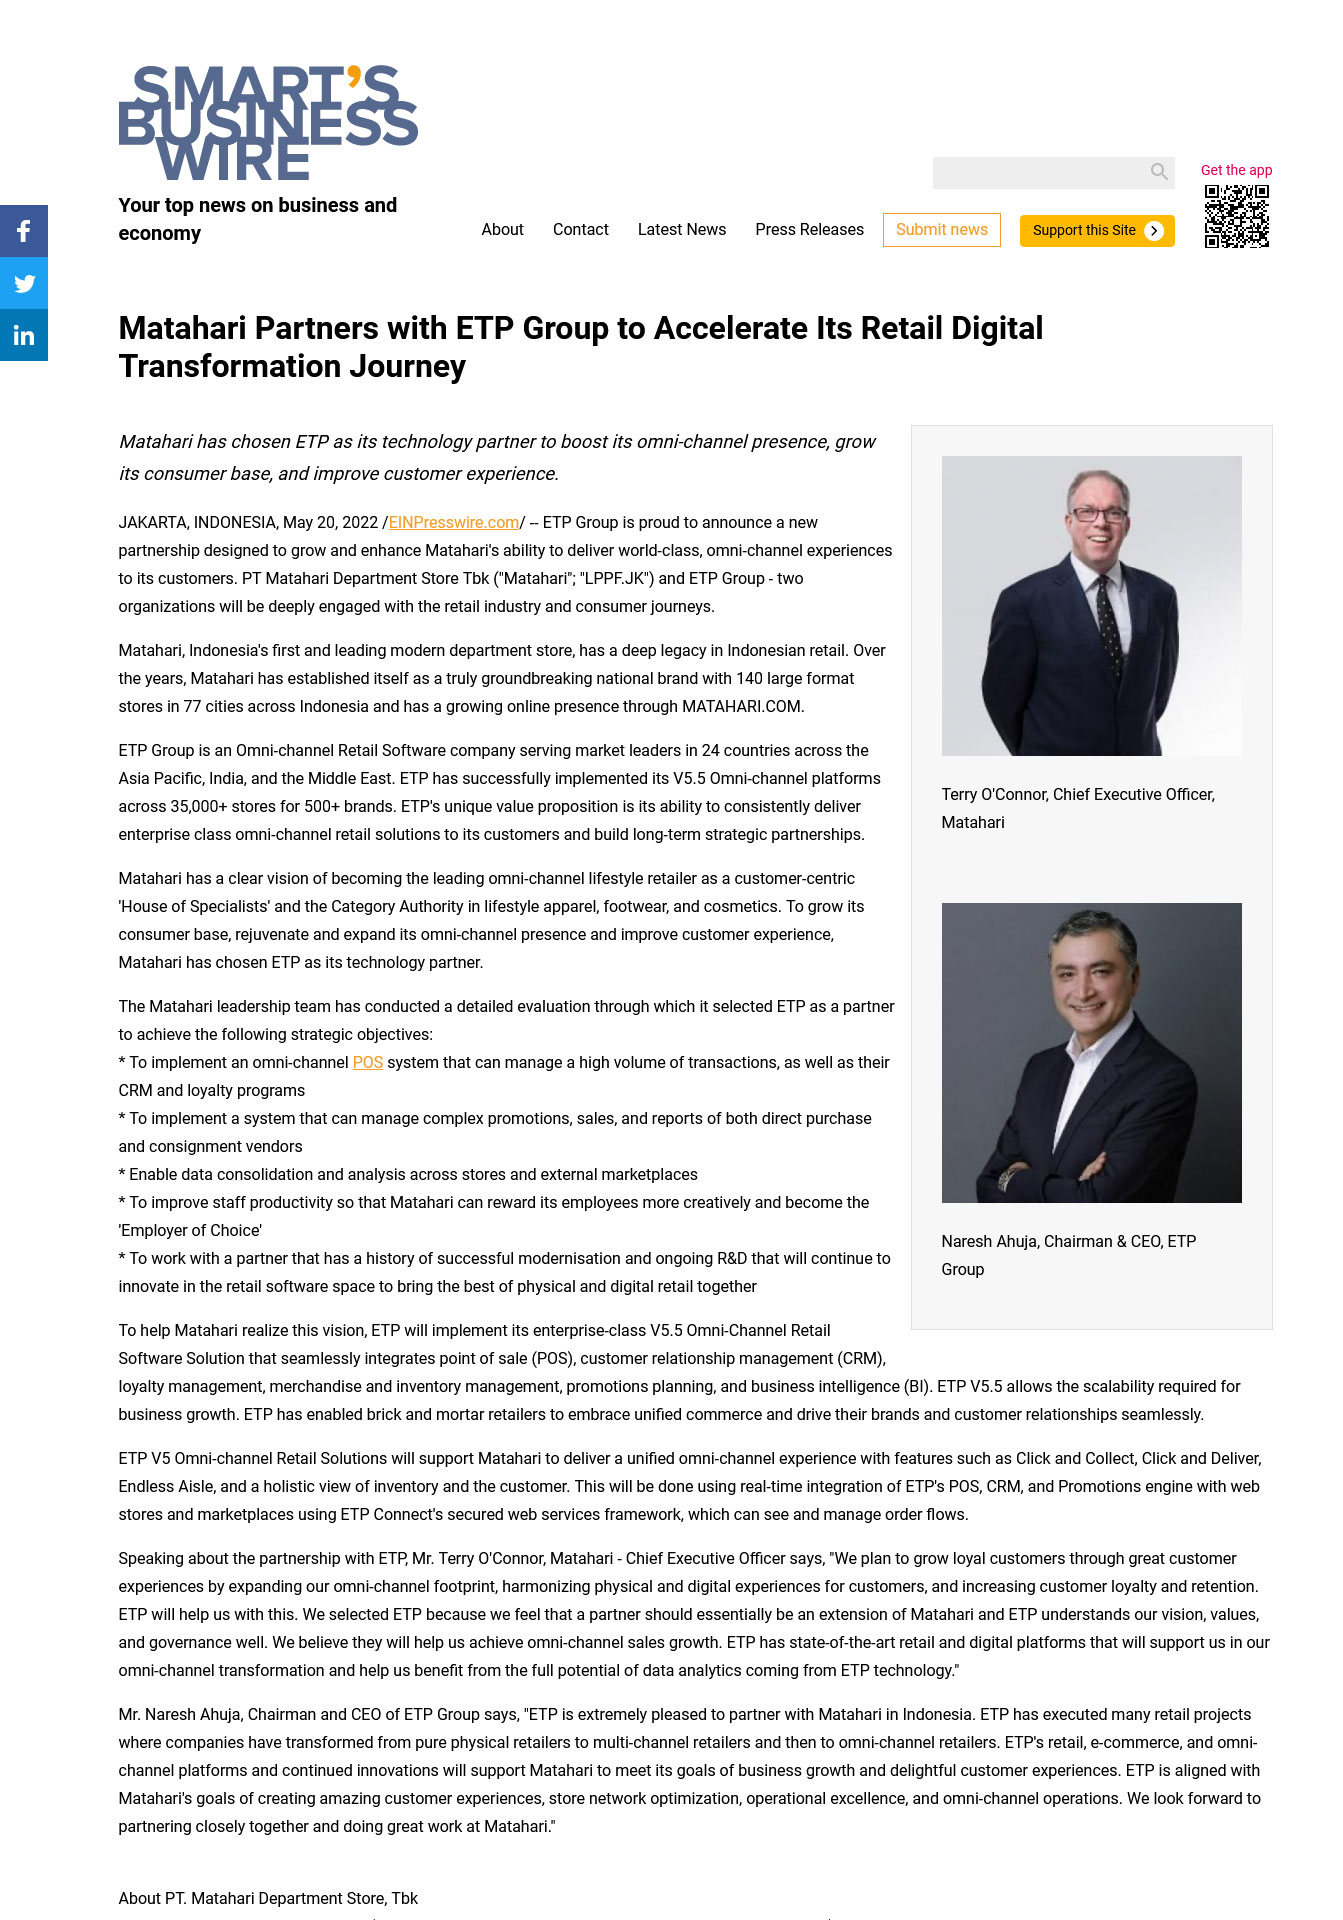 Smart&#8217;s Business Wire: Matahari Partners with ETP Group to Accelerate Its Retail Digital Transformation Journey